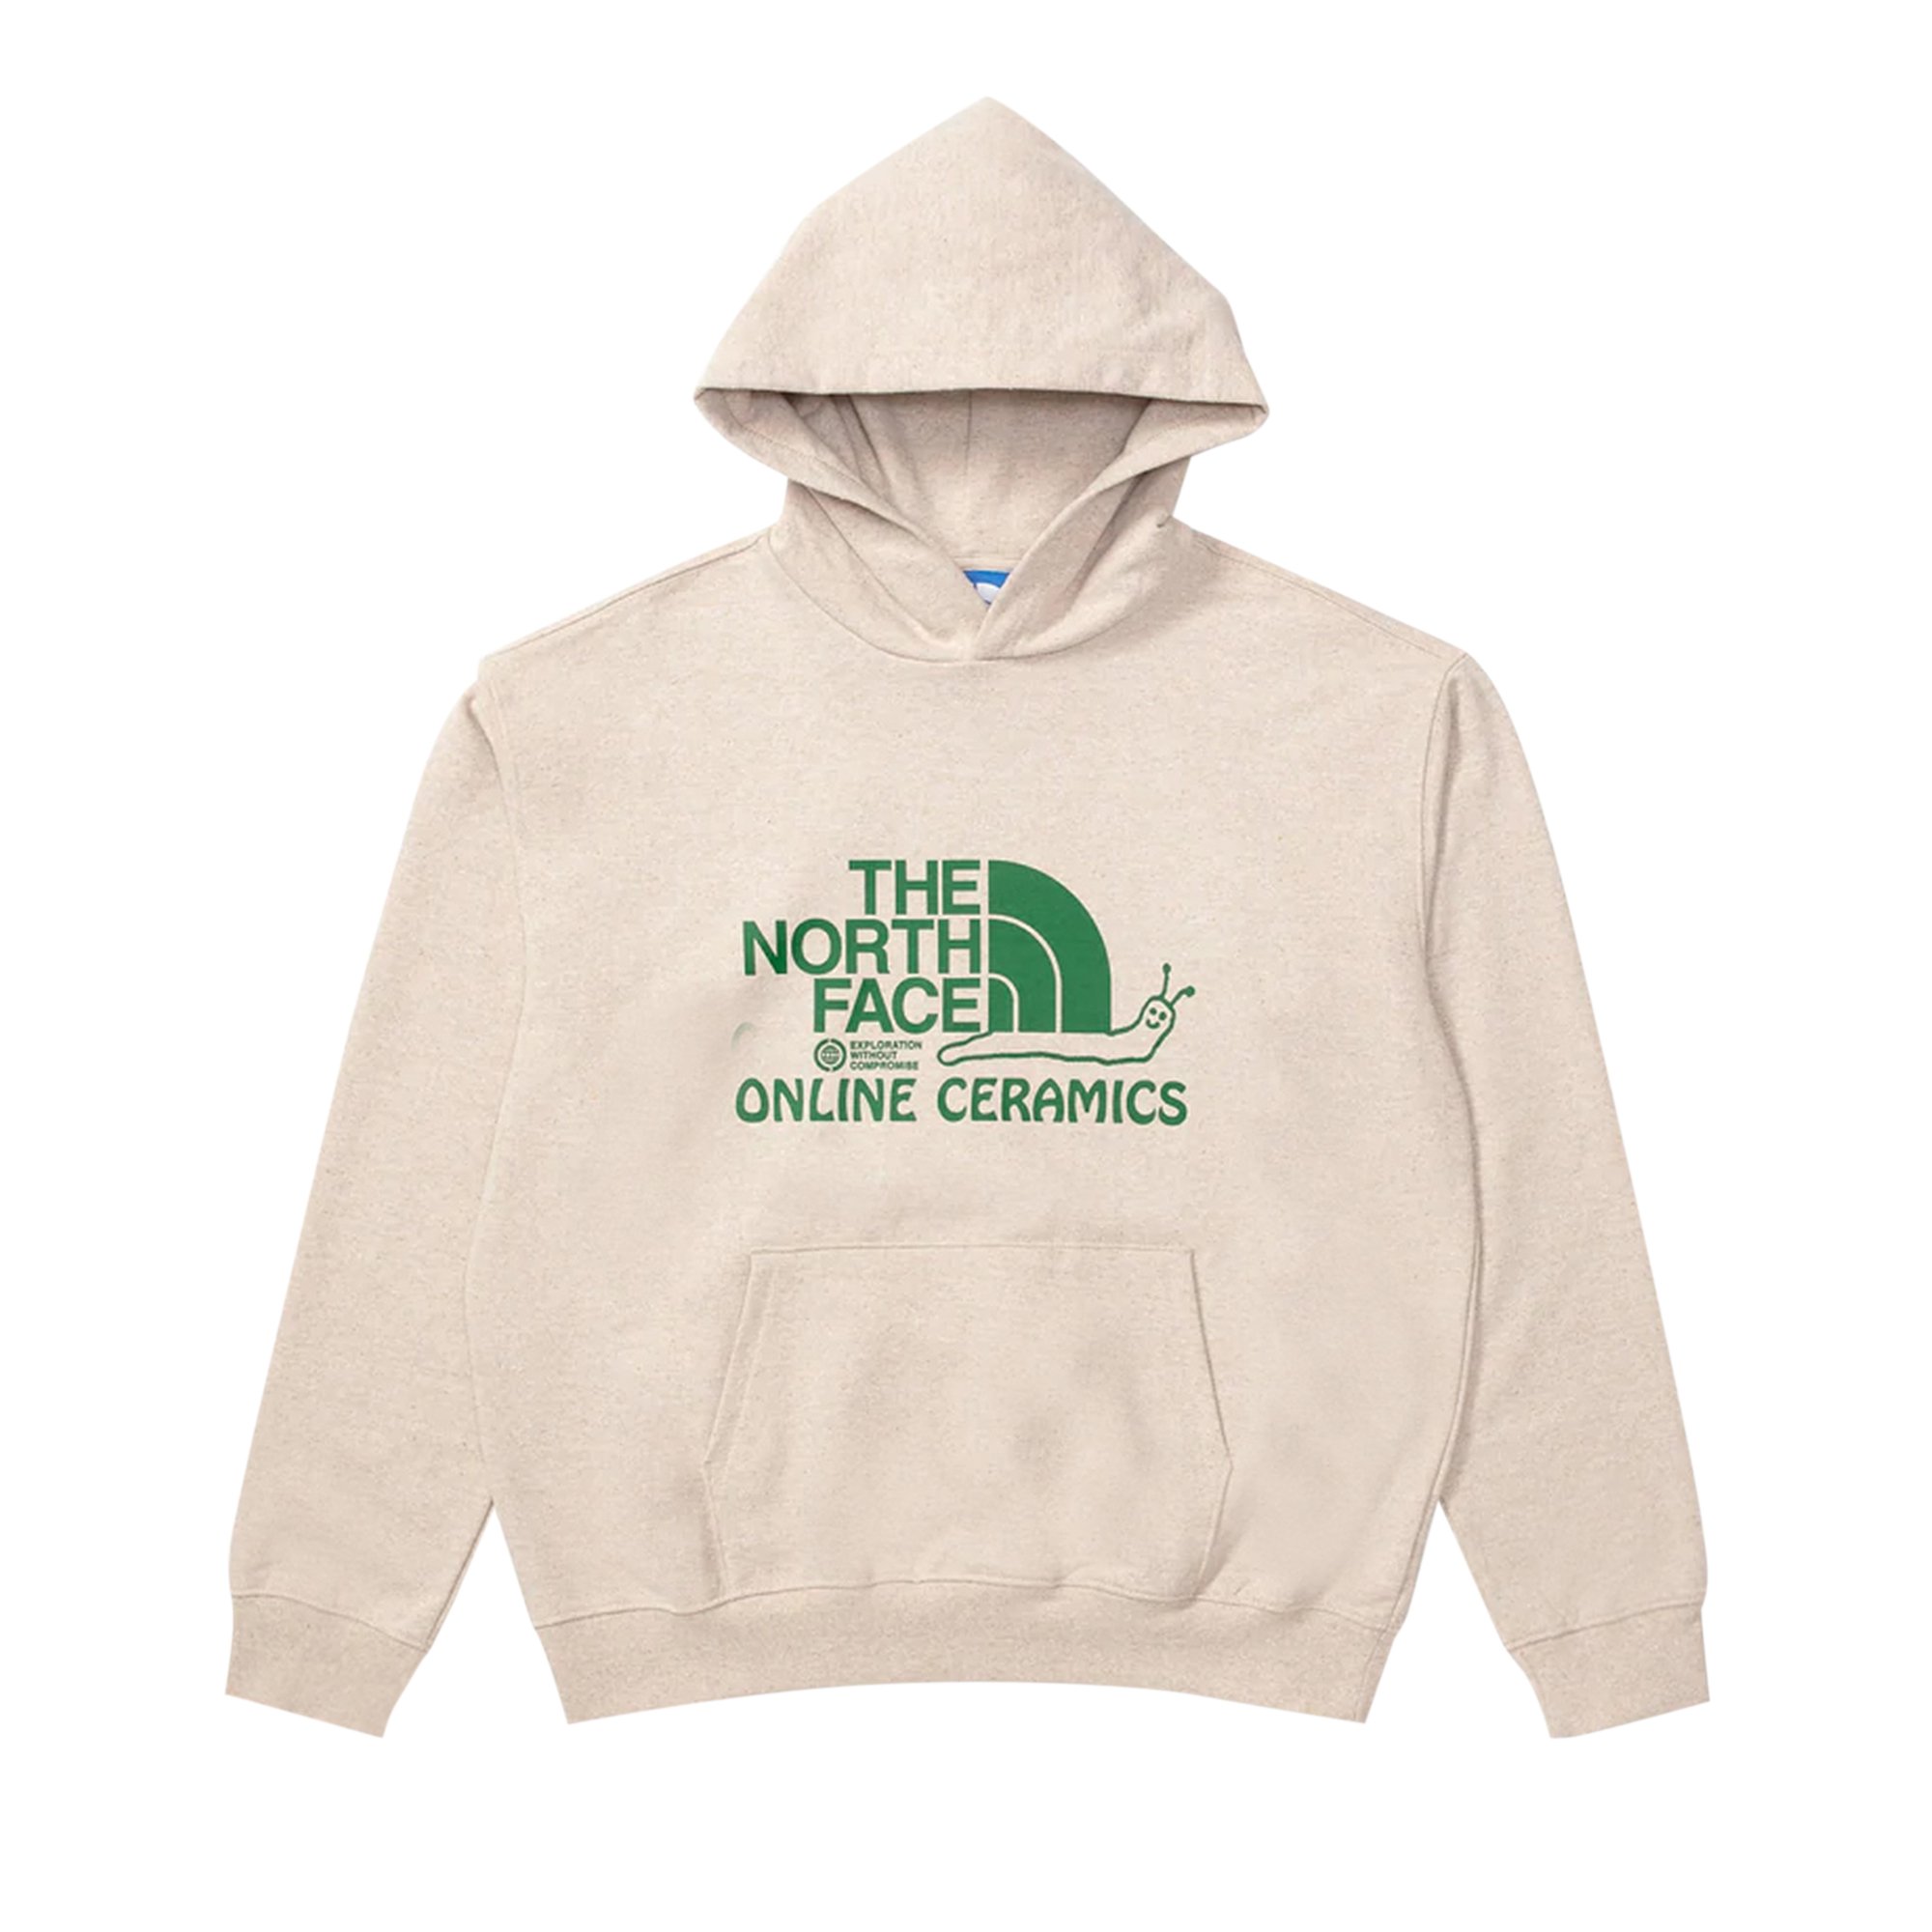 The North Face x Online Ceramics Graphic Hoodie 'White Regrind'